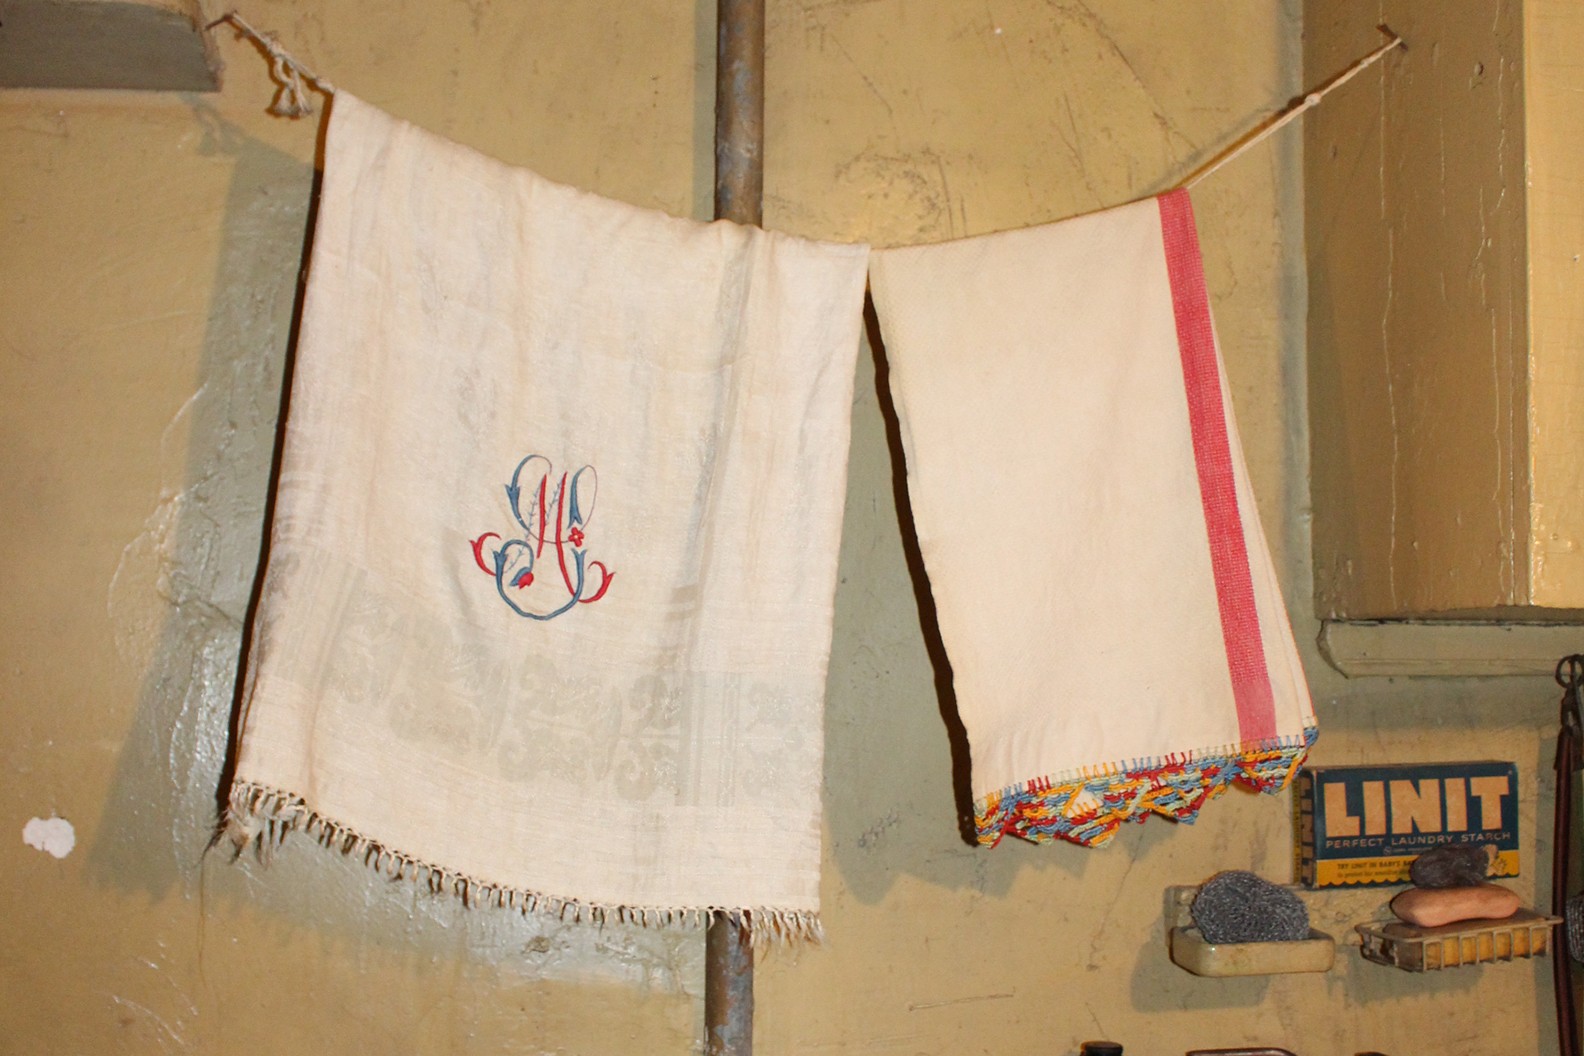 Dish towels hanging on a line in the recreated Baldizzi kitchen